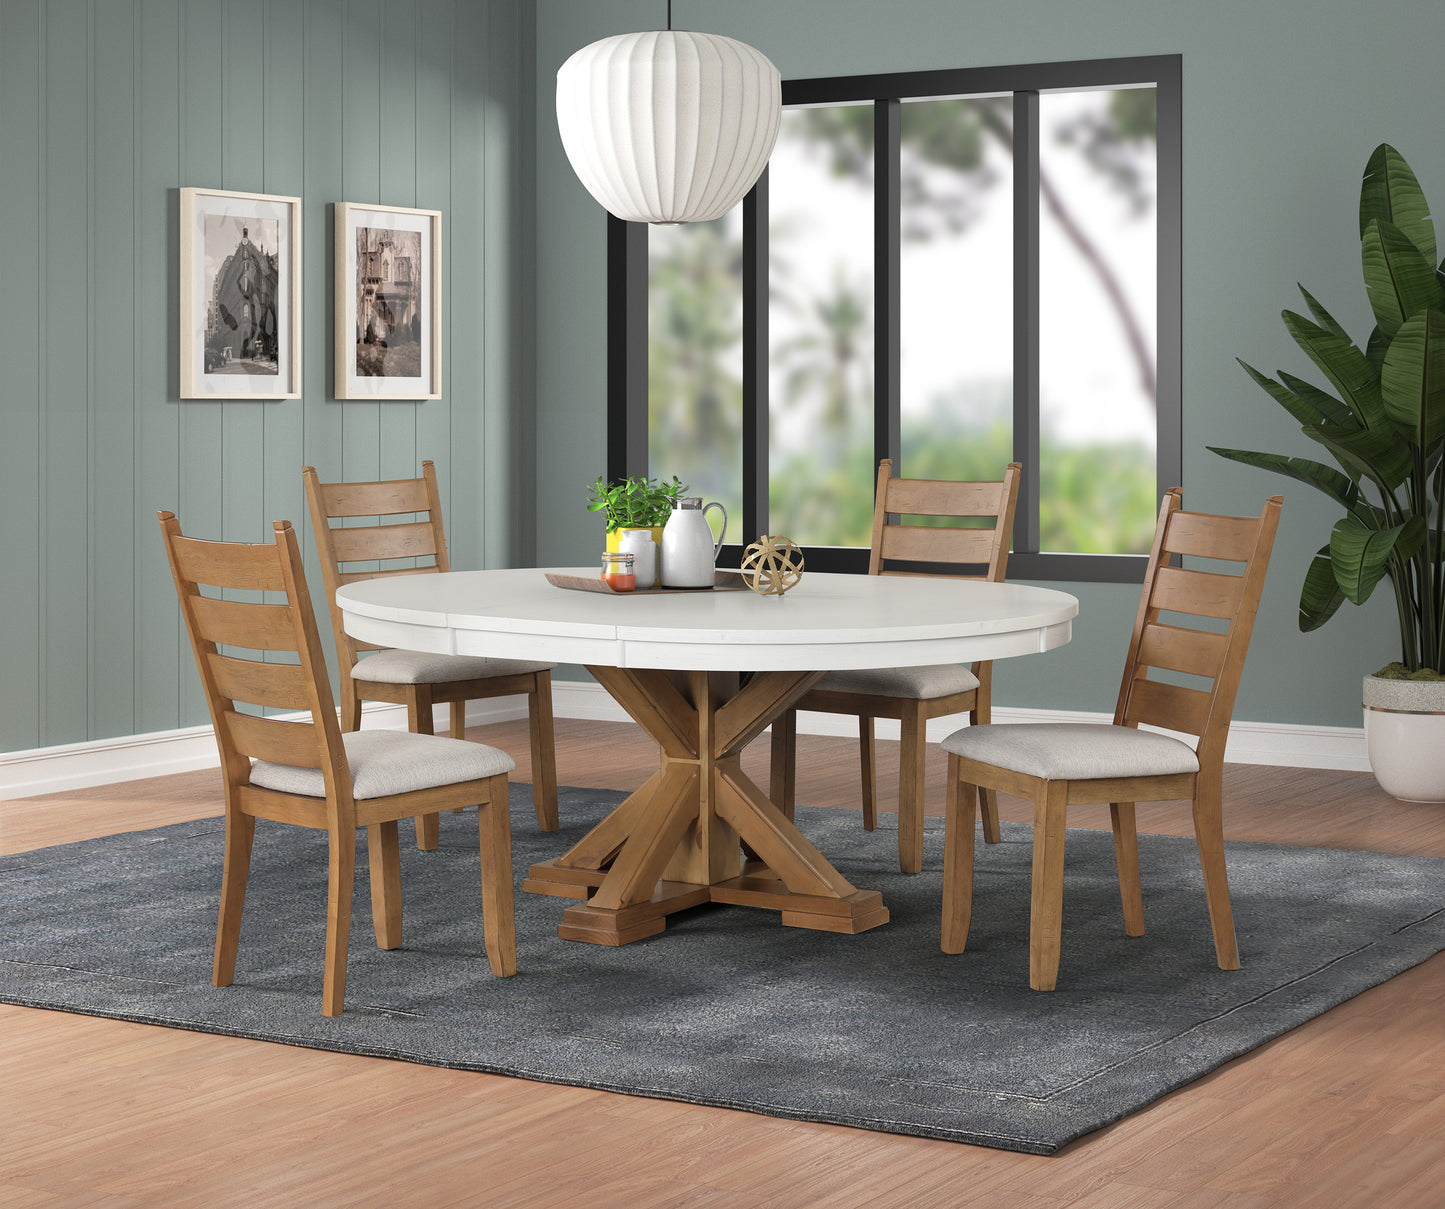 Trina 5 Piece Round/Oval Dining Set with White Top and Natural Chairs